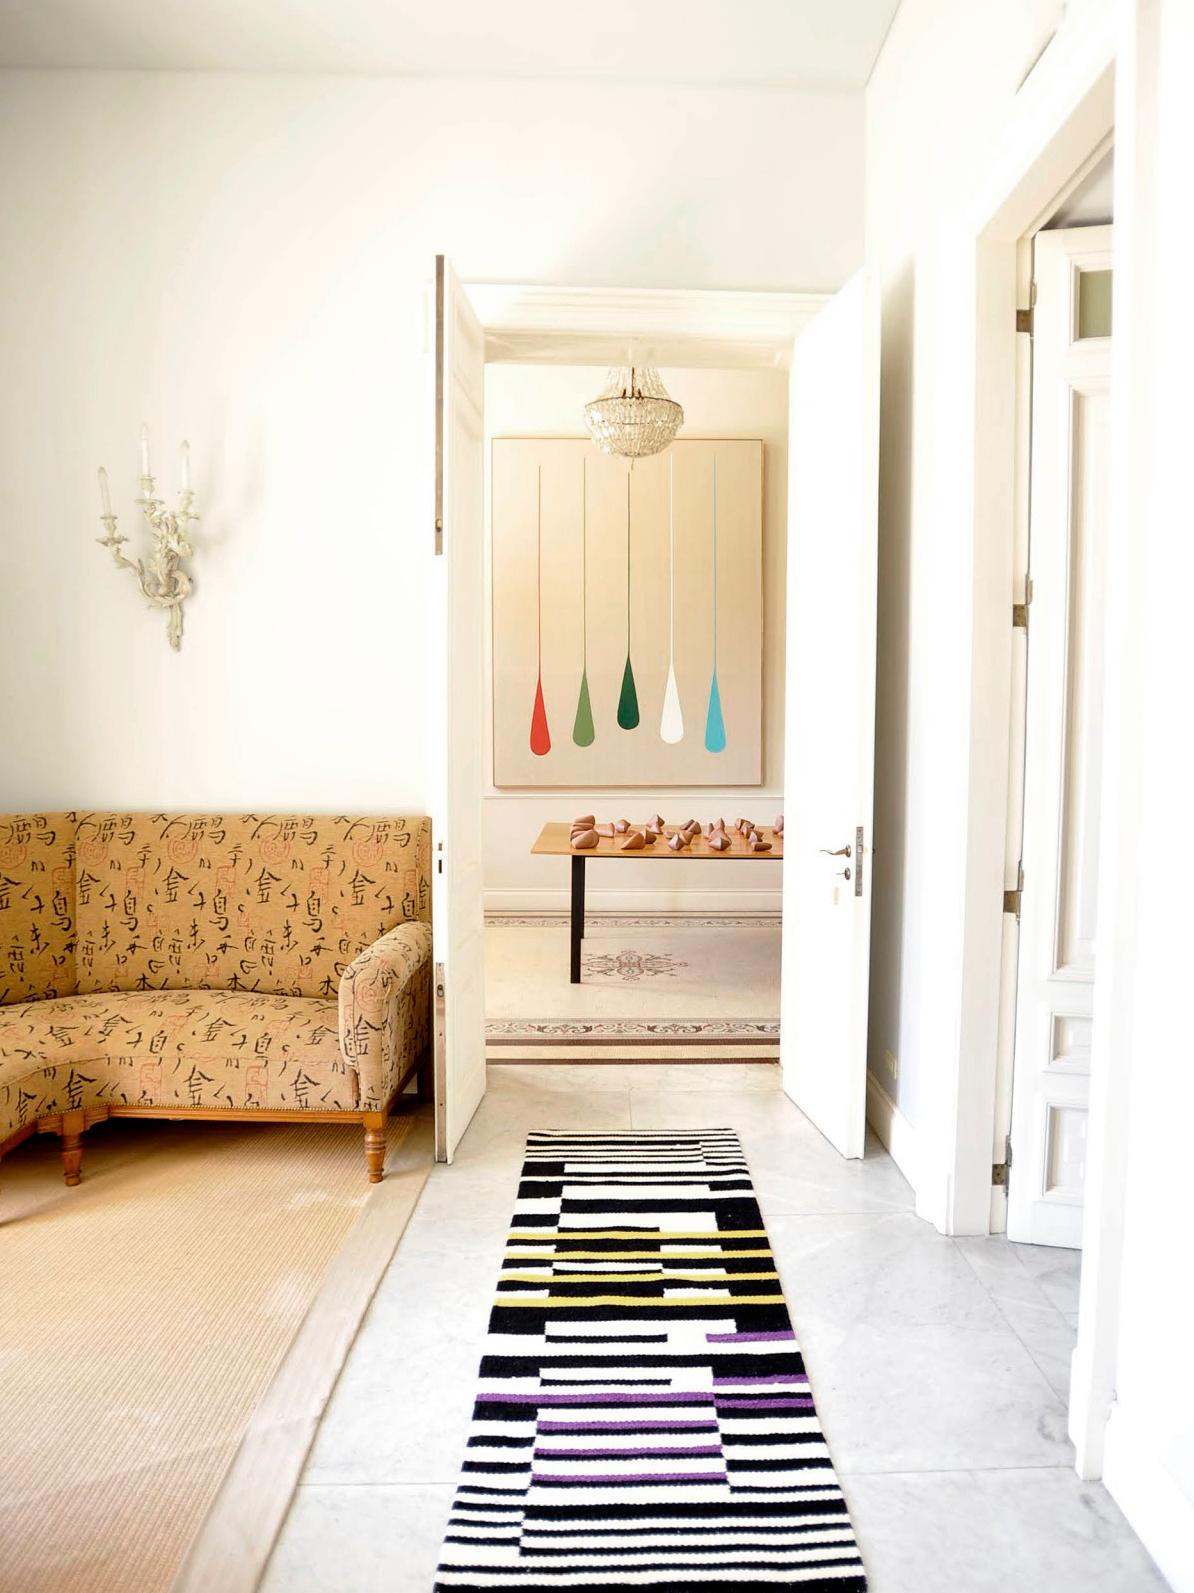 Adapted from the original artwork by Ary Brizzi, Untitled, 1960.

Limited edition of 15 handmade and unique rugs.  

 LALANA RUGS is an applied arts initiative born from the desire to combine proposals by contemporary artists with traditional local